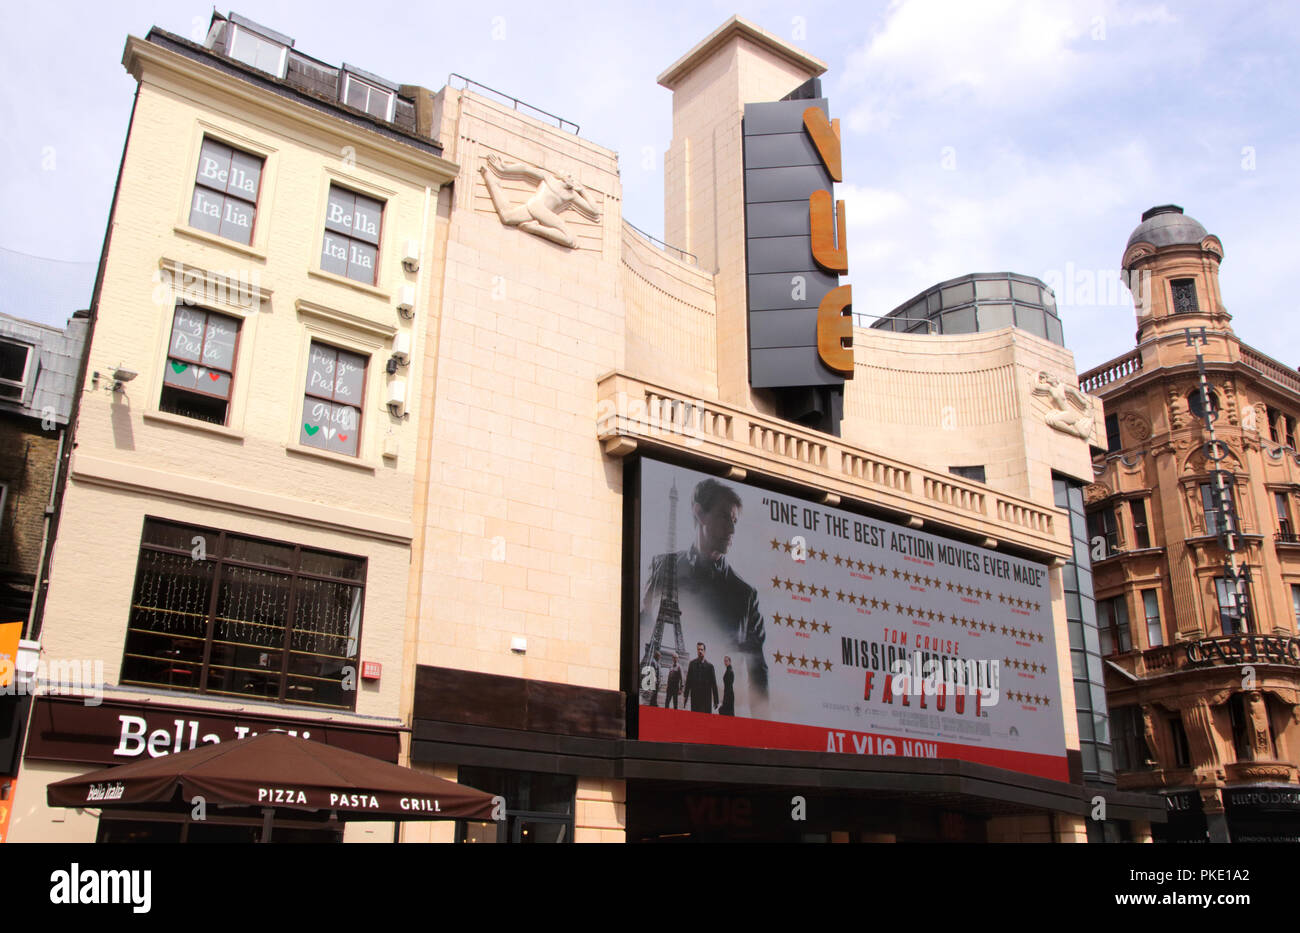 Vue Cinema Leicester Square London August 2018 Stock Photo